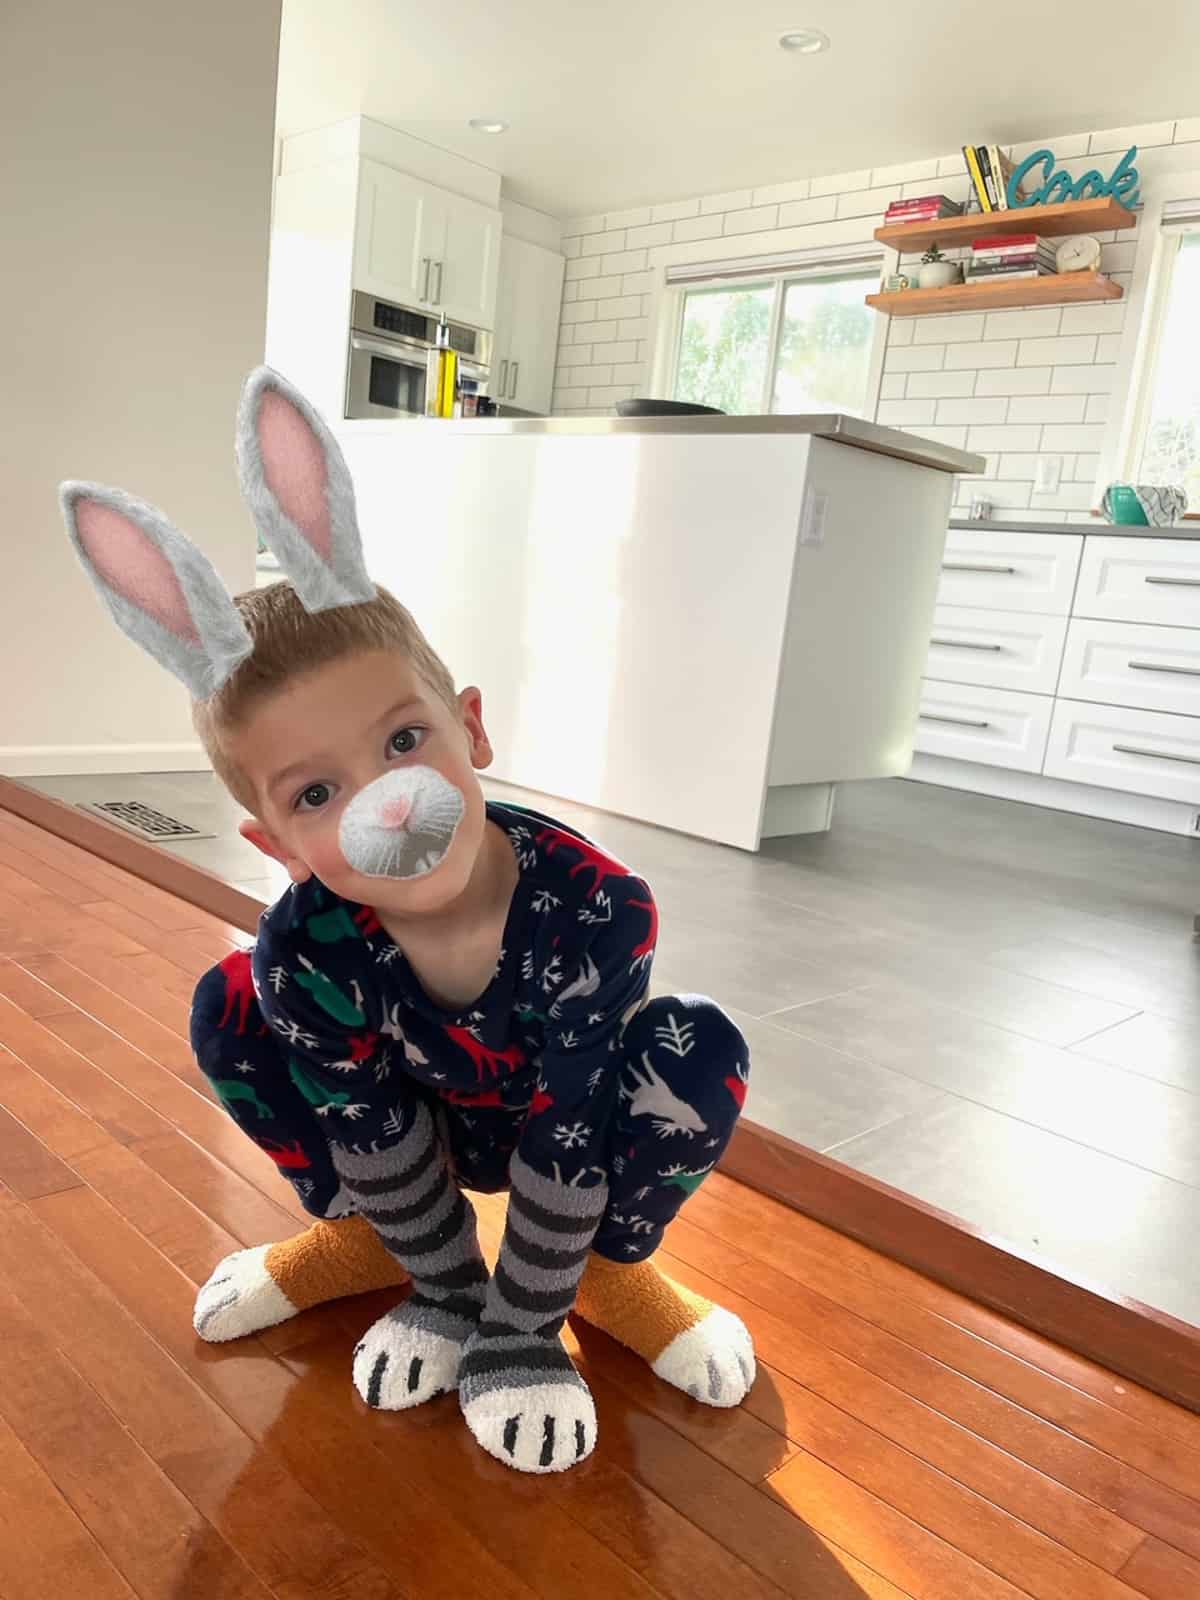 a kid dressed as a bunny in a kitchen.